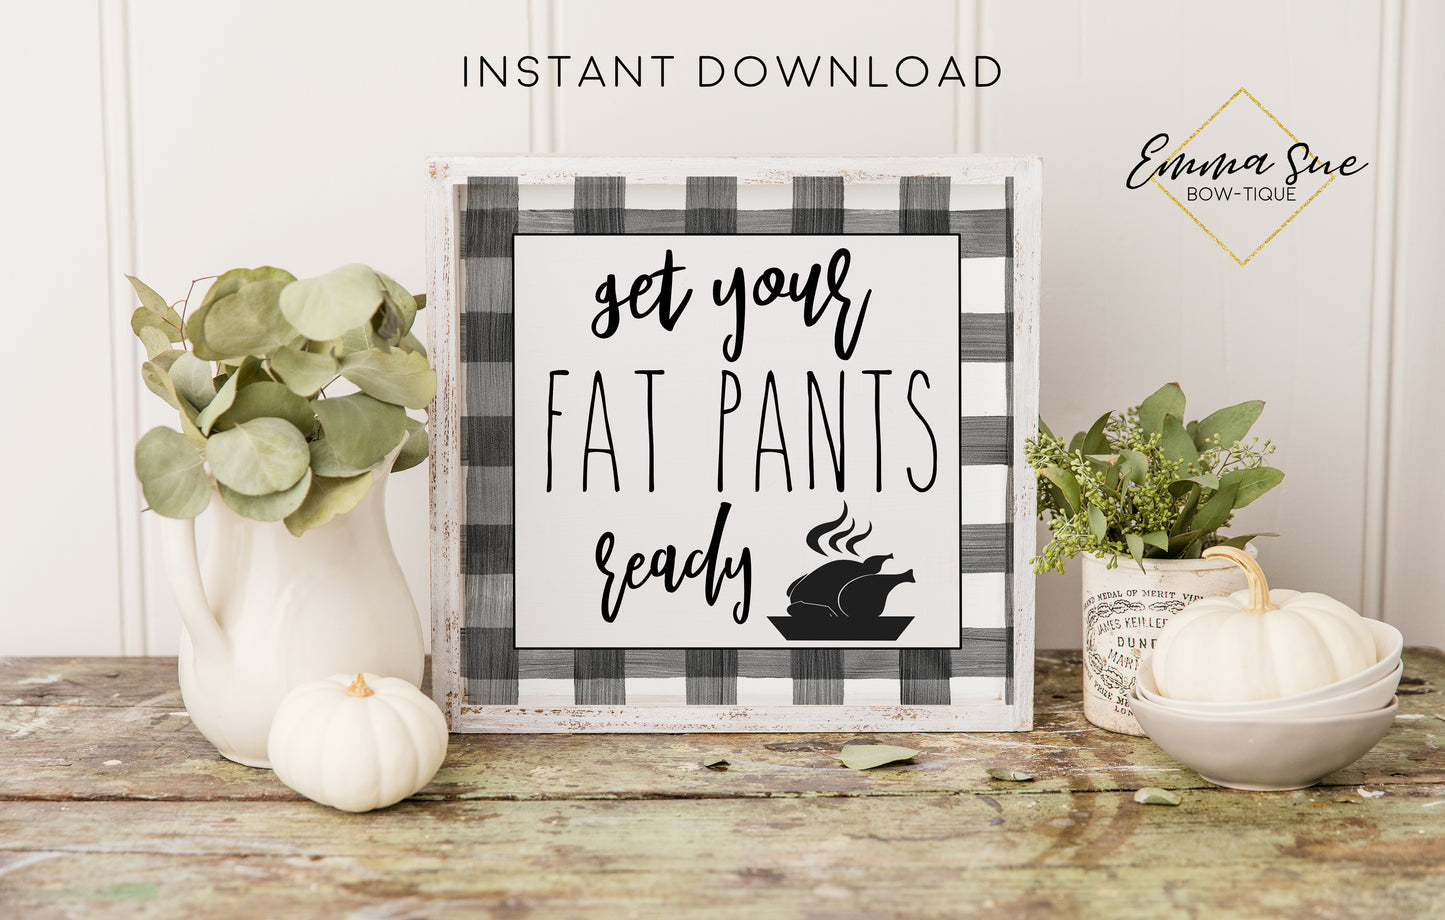 Get your fat pants ready - Black & White Plaid Funny Thanksgiving Fall Autumn Decor Printable Sign Farmhouse Style  - Digital File